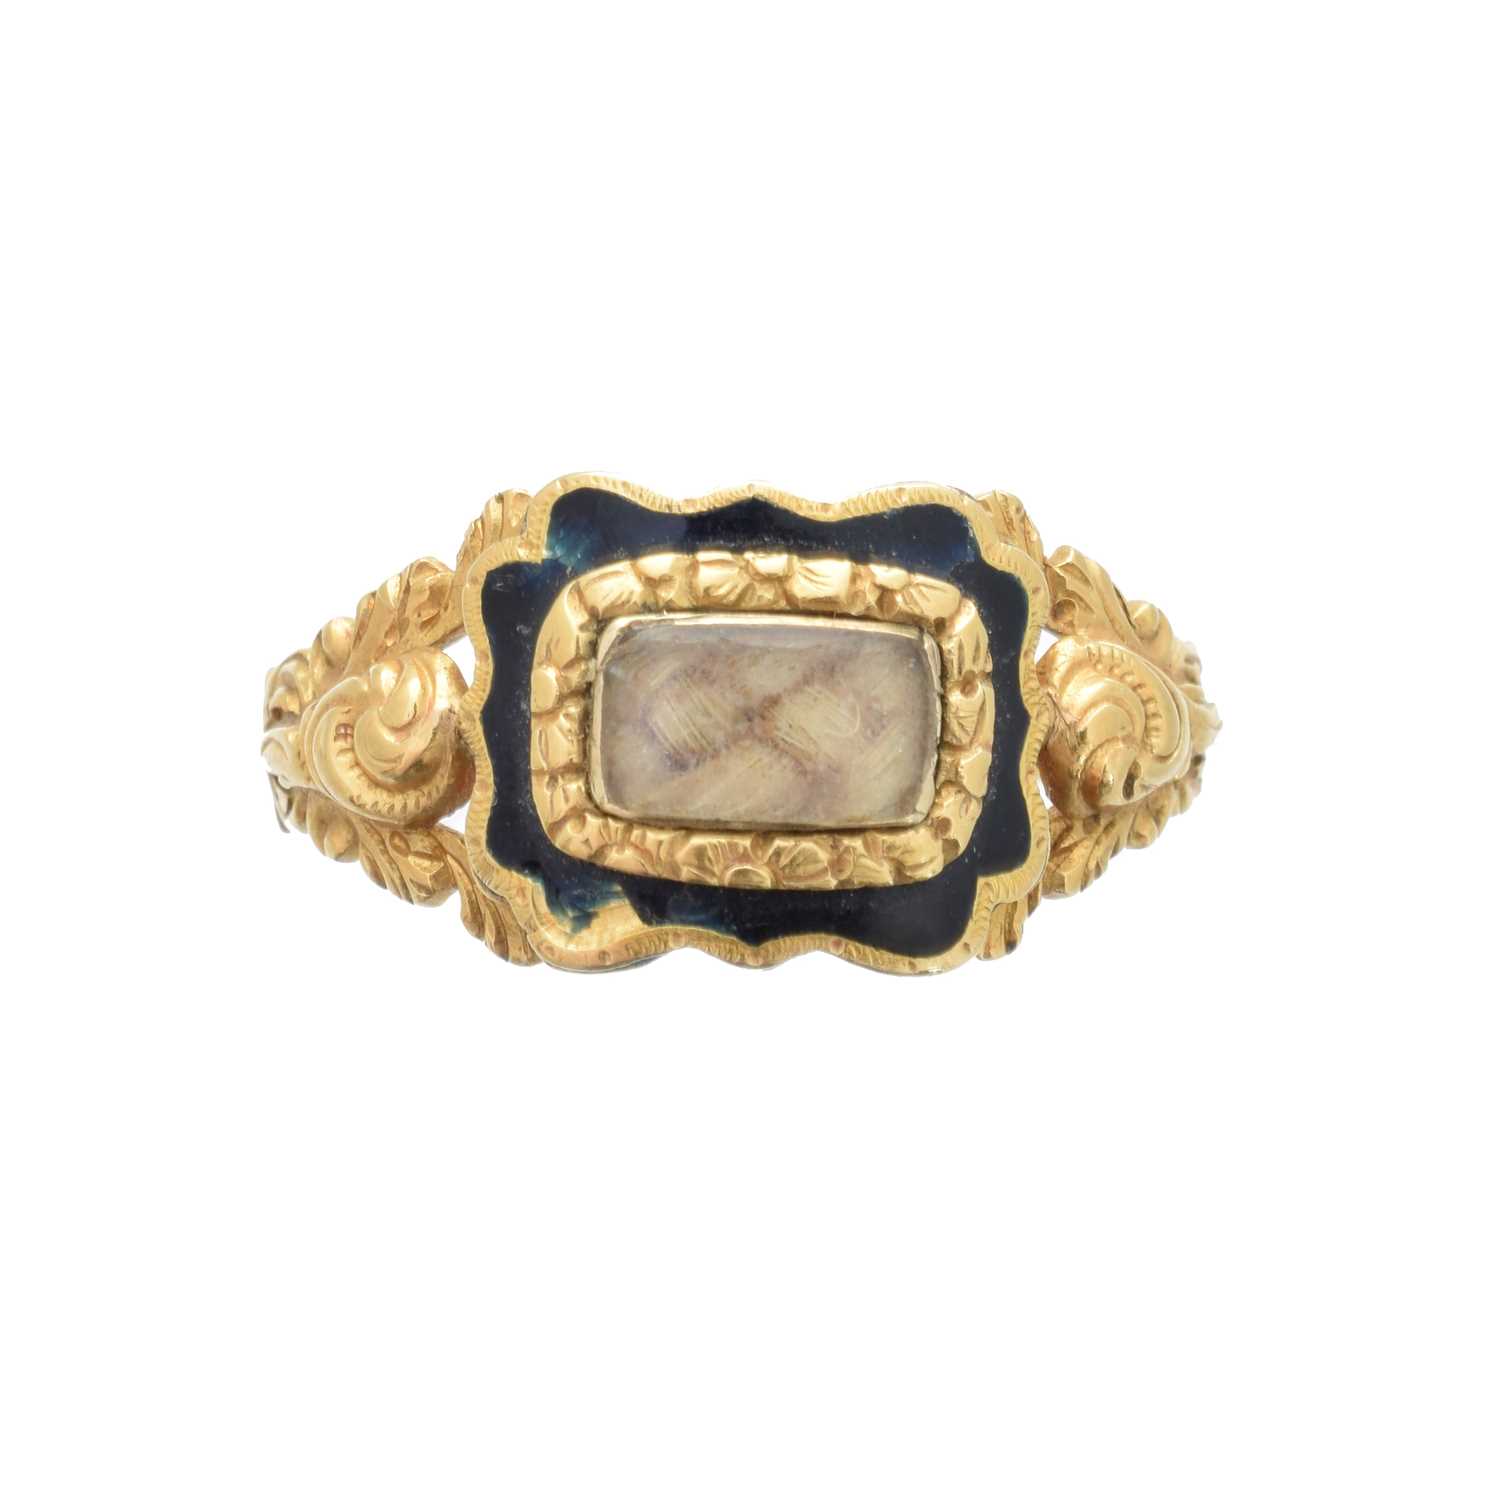 Lot 241 - An 18ct gold William IV mourning ring